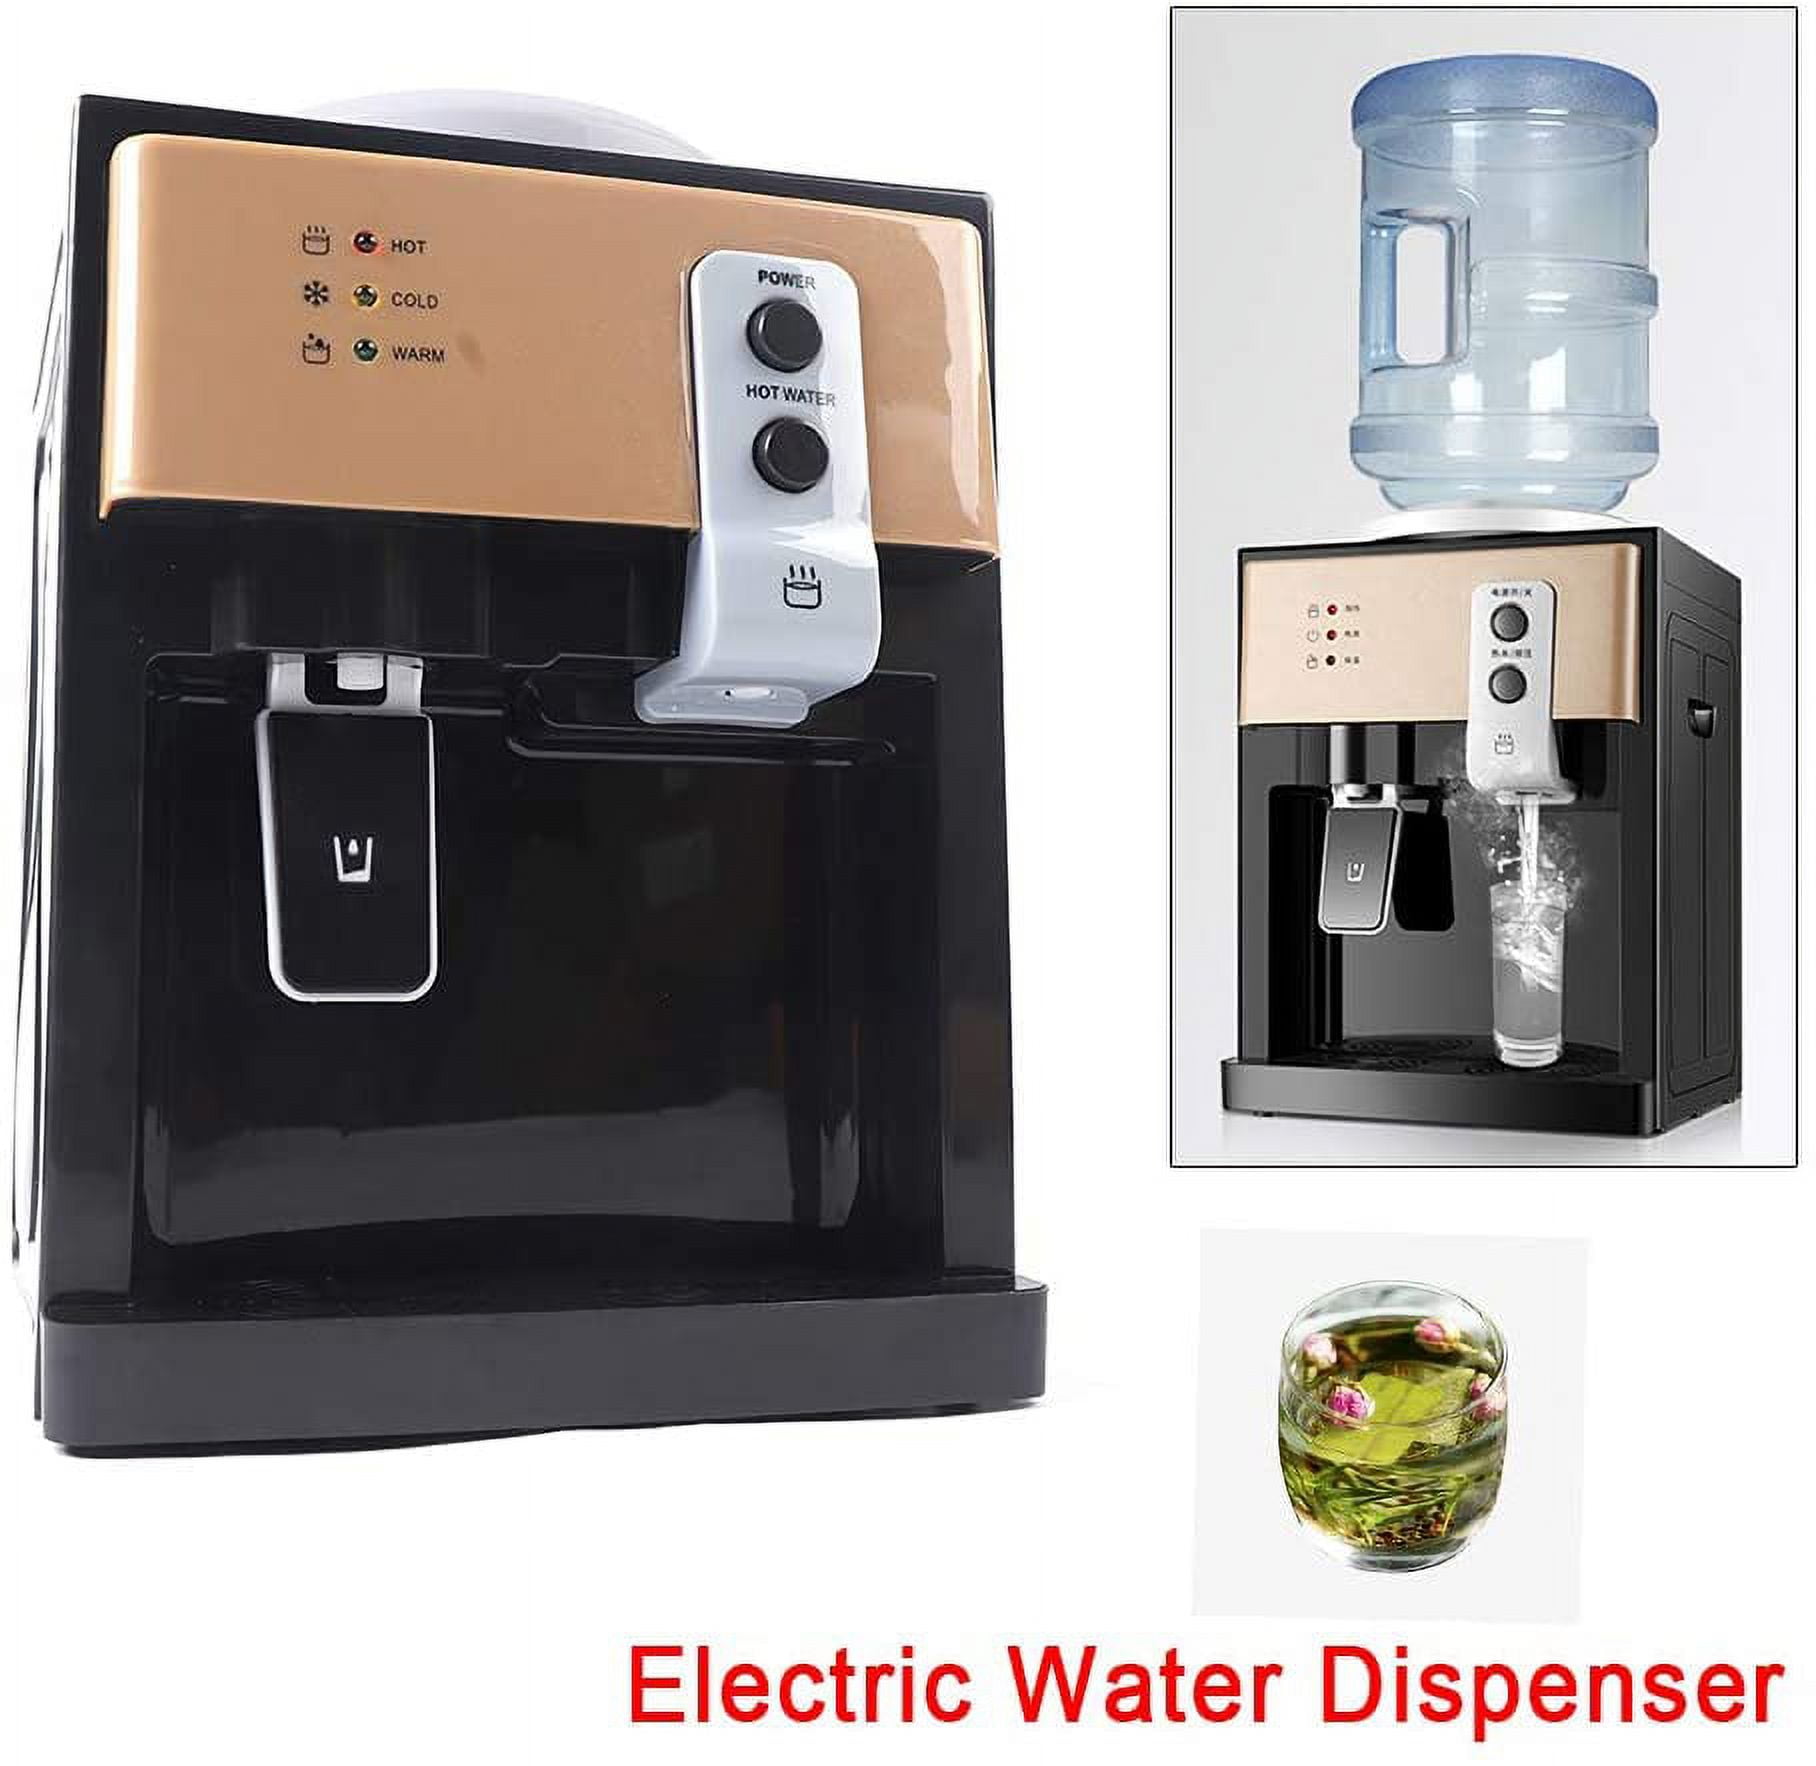 Miumaeov Countertop Hot and Cold Water Cooler Dispenser 5 Gallon Stainless  Steel Electric Top Loading Water Dispenser for Home Kitchen Offices Dorm